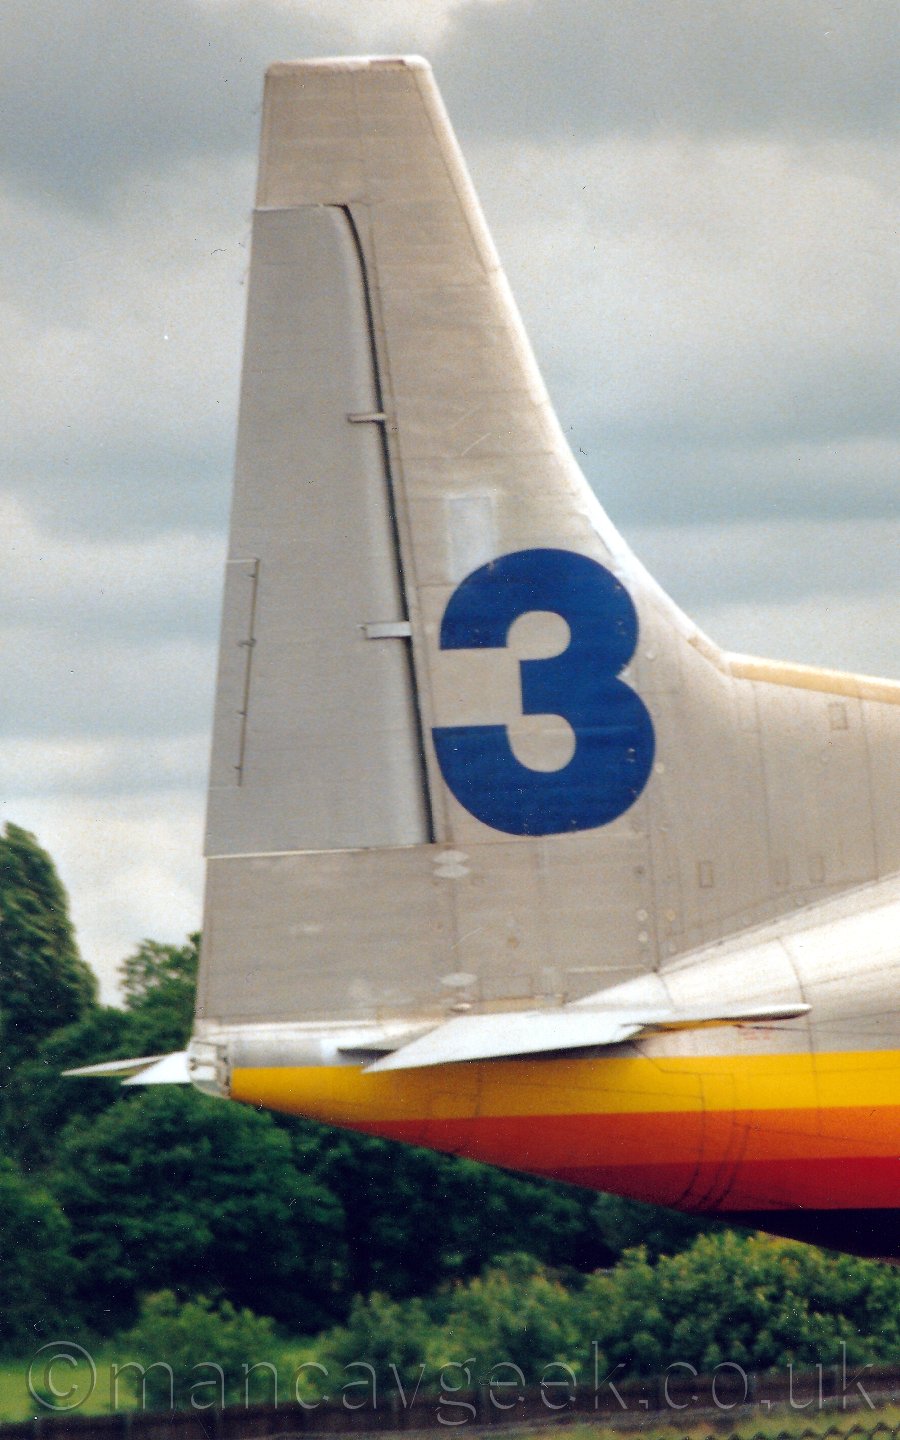 Closup of the silver tail of a silver plane with an yellow, orange, red, and dark blue stripe running along the body, faciong to the right, with trees in the background, under a cloudy grey sky.